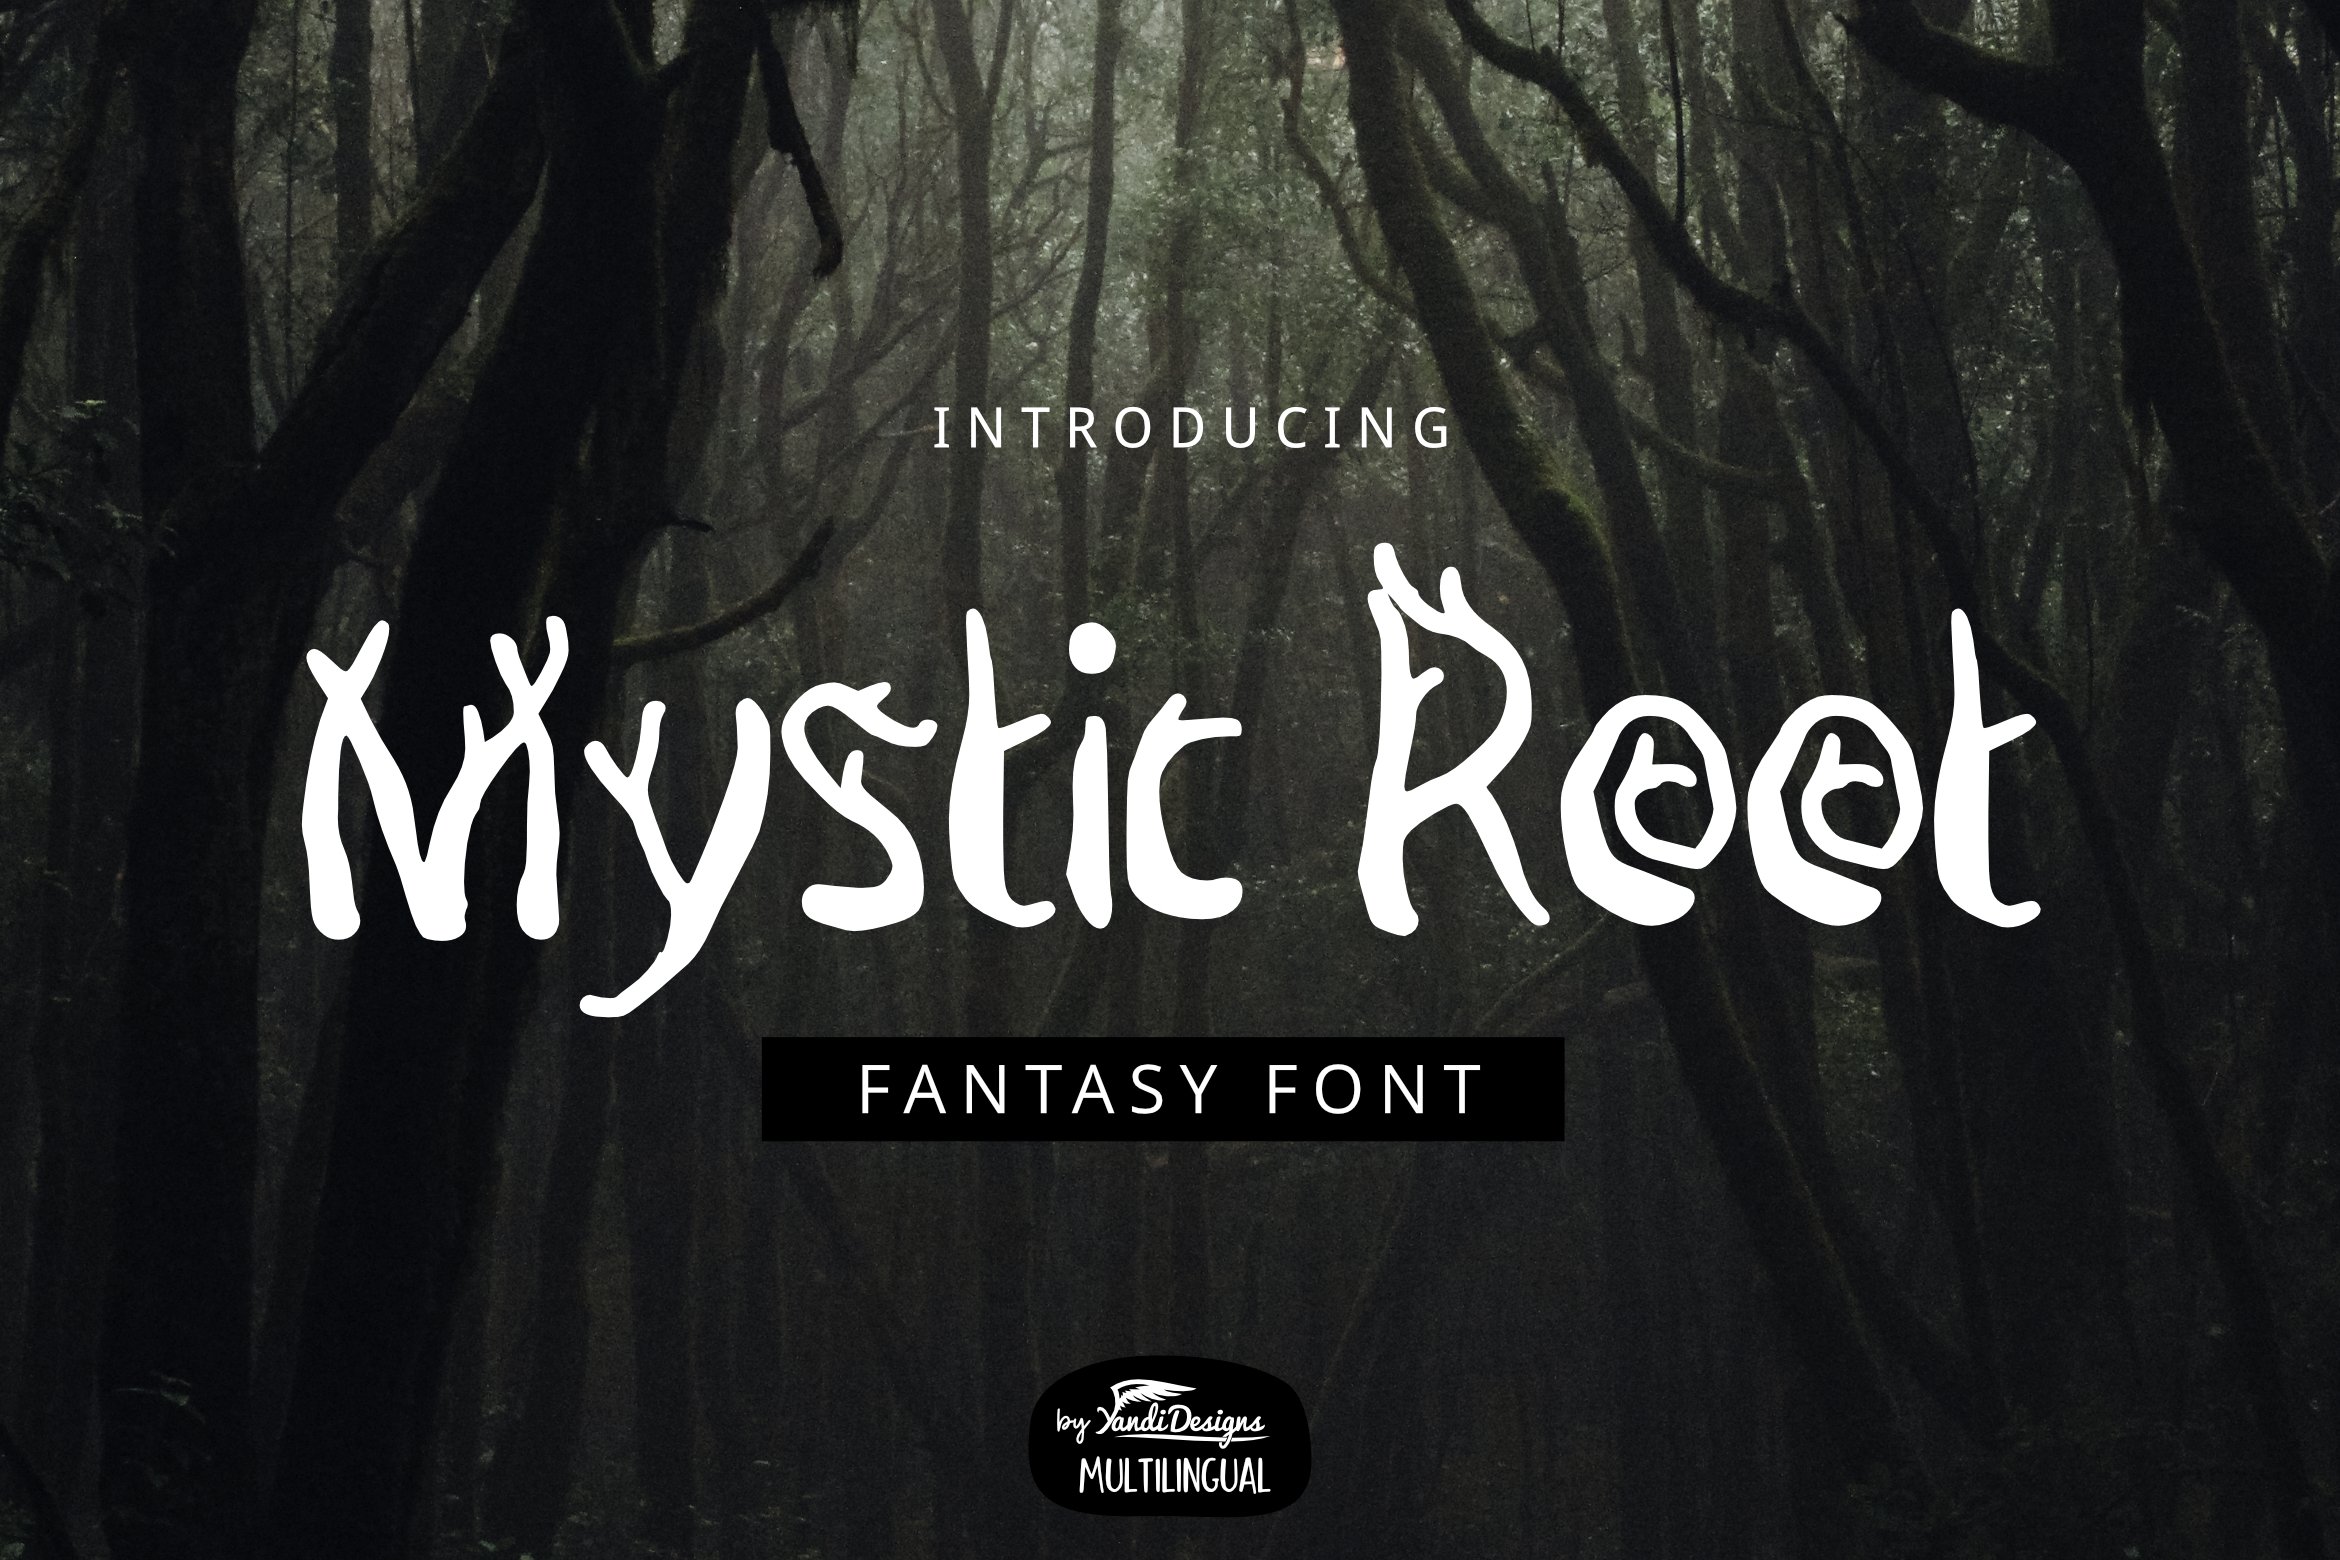 Mystic Root Font cover image.